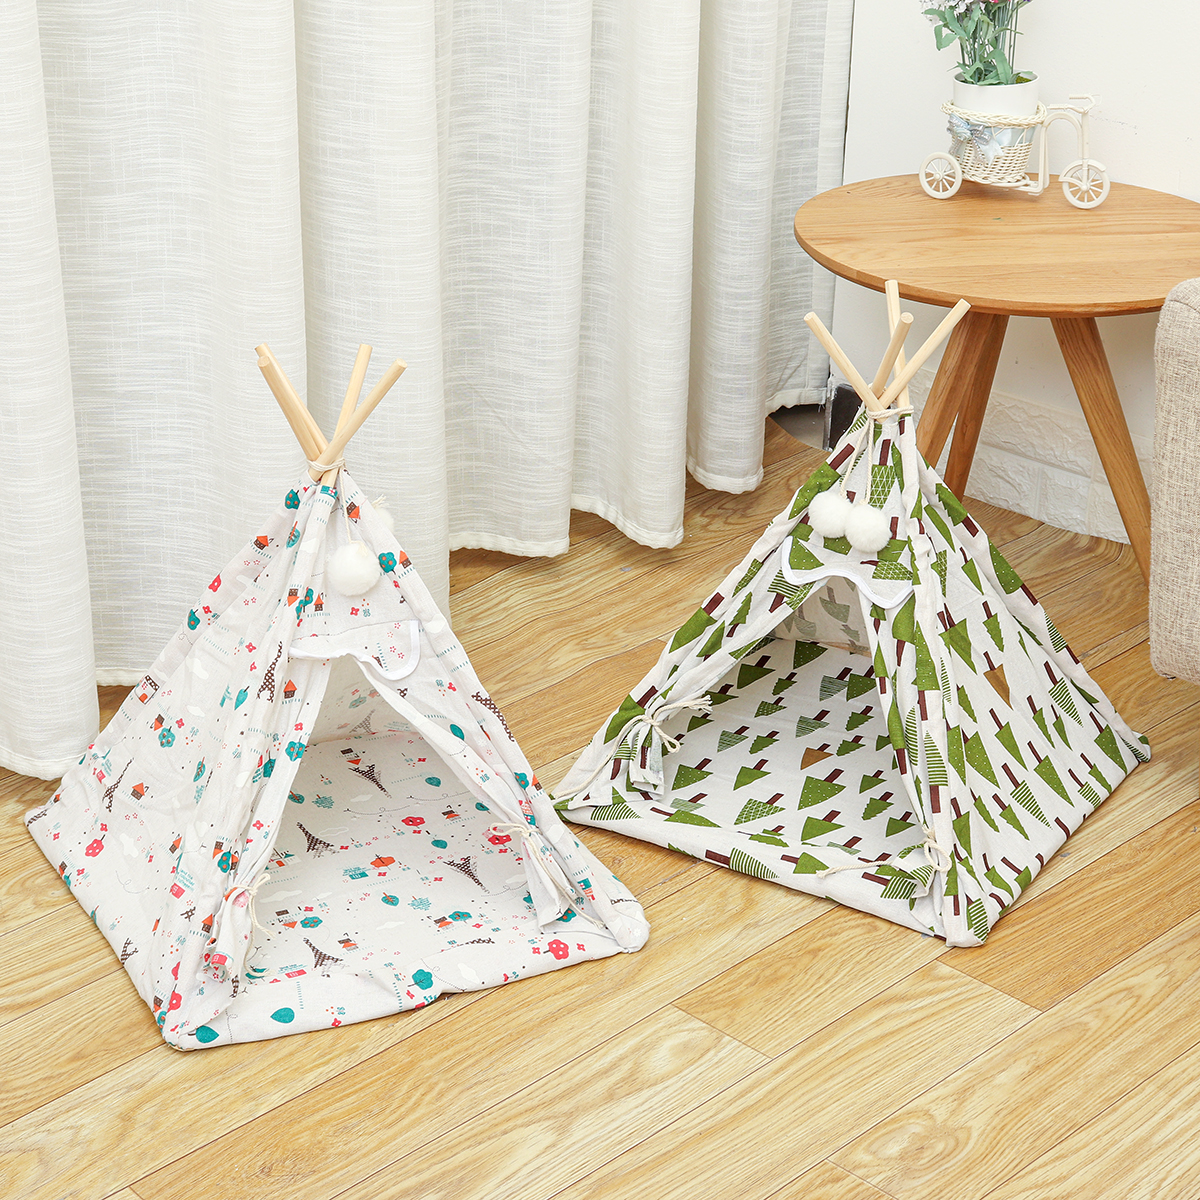 Foldable-Linen-Pet-Bed-Tent-Dog-House-Bed-Washable-Puppy-Cat-Play-Indoor-Teepee-Mat-1691904-4